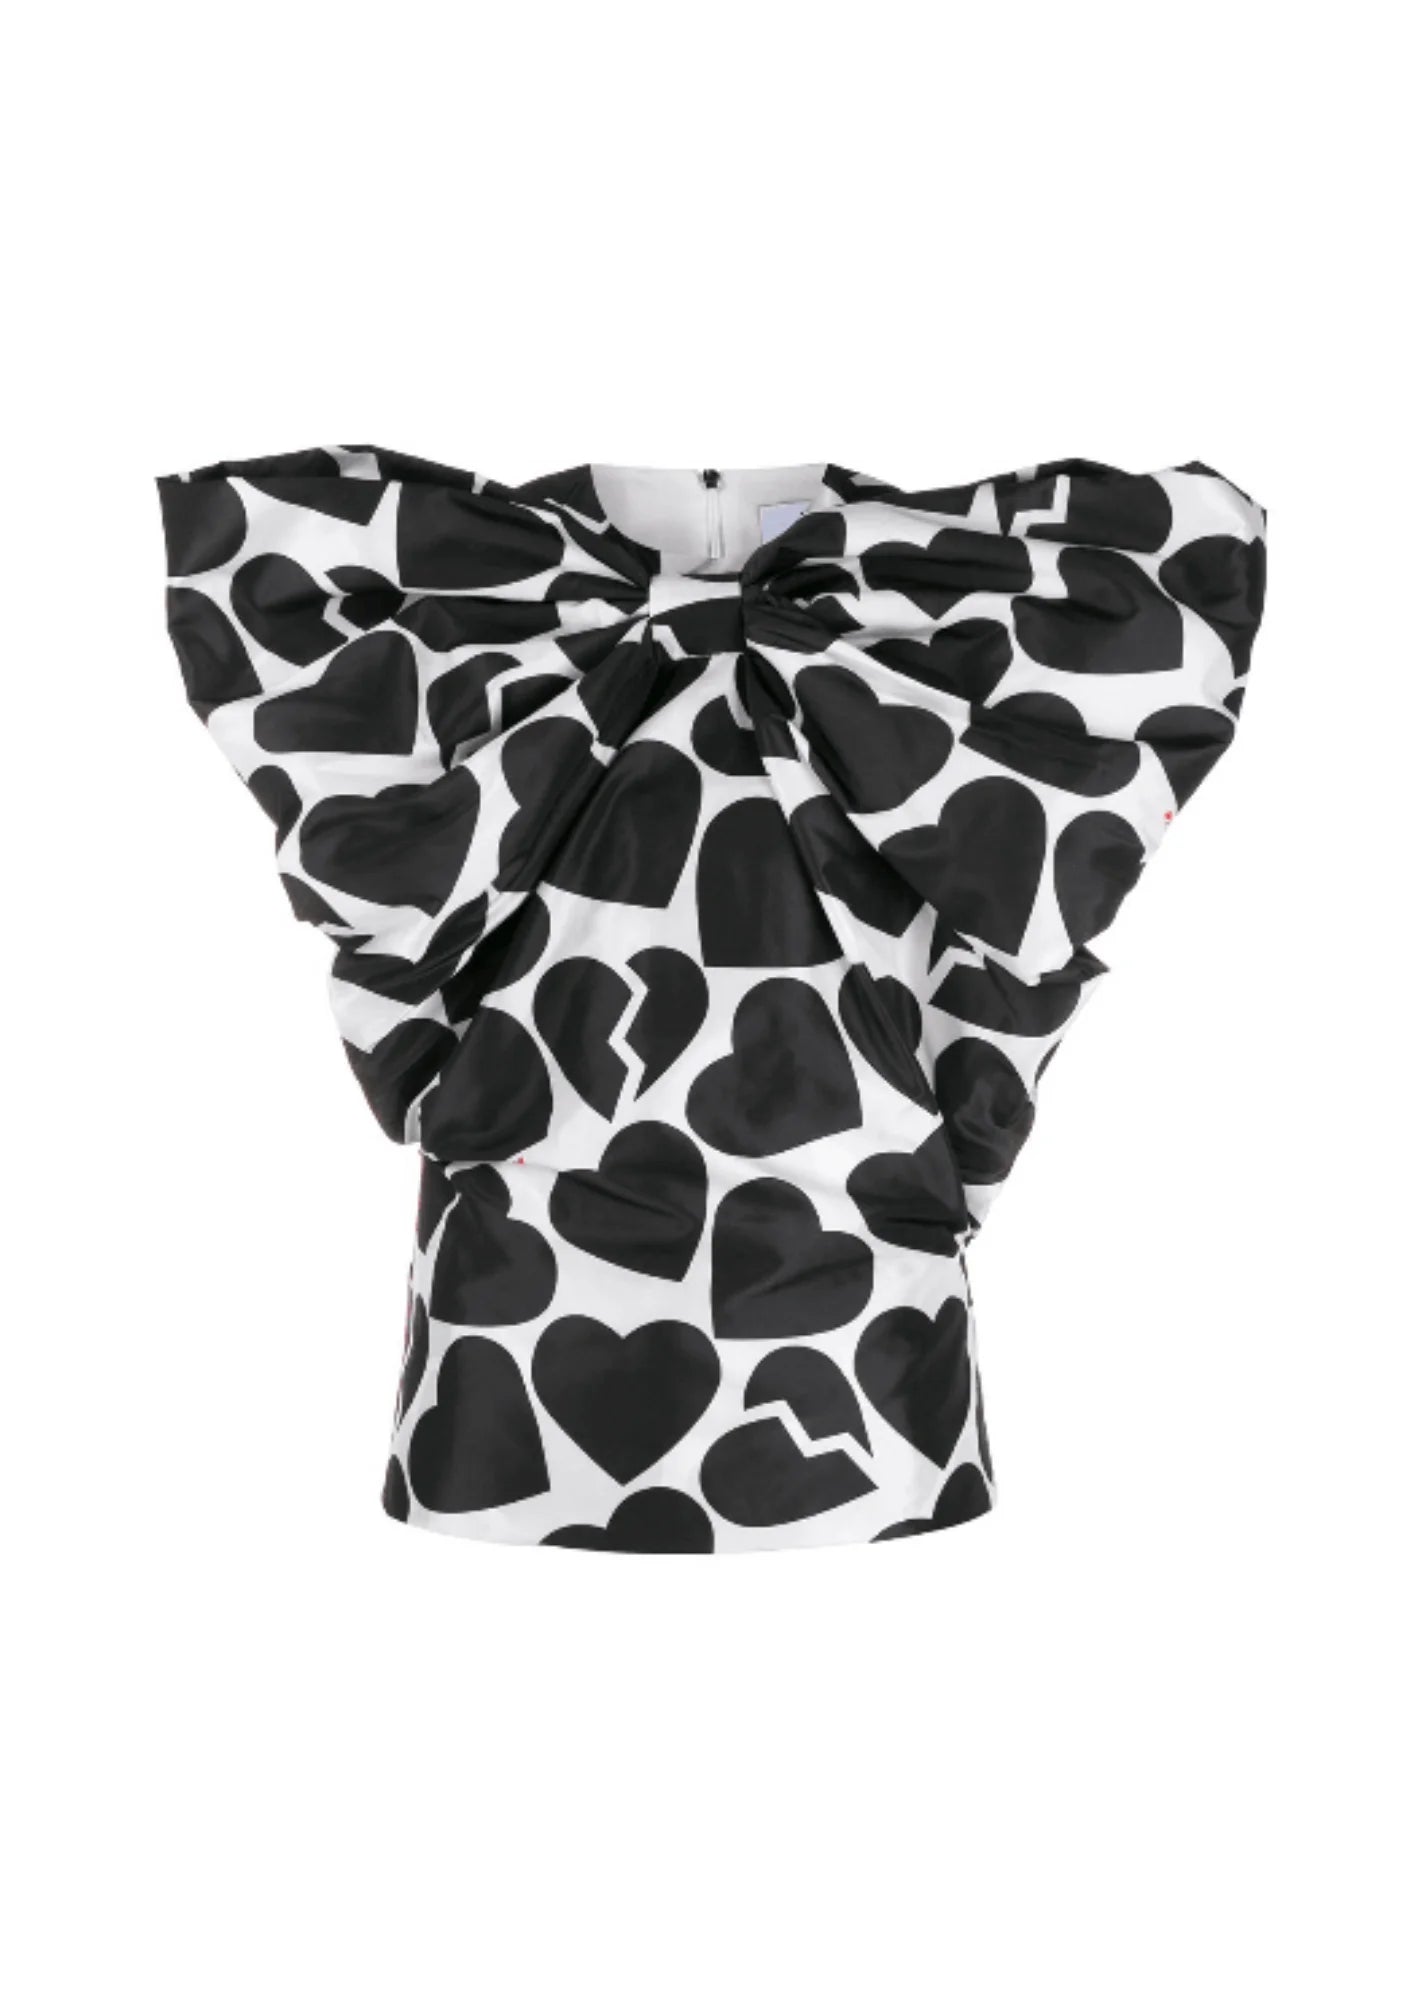 PRINTED TOP WITH LAVALLIÈRE COLLAR